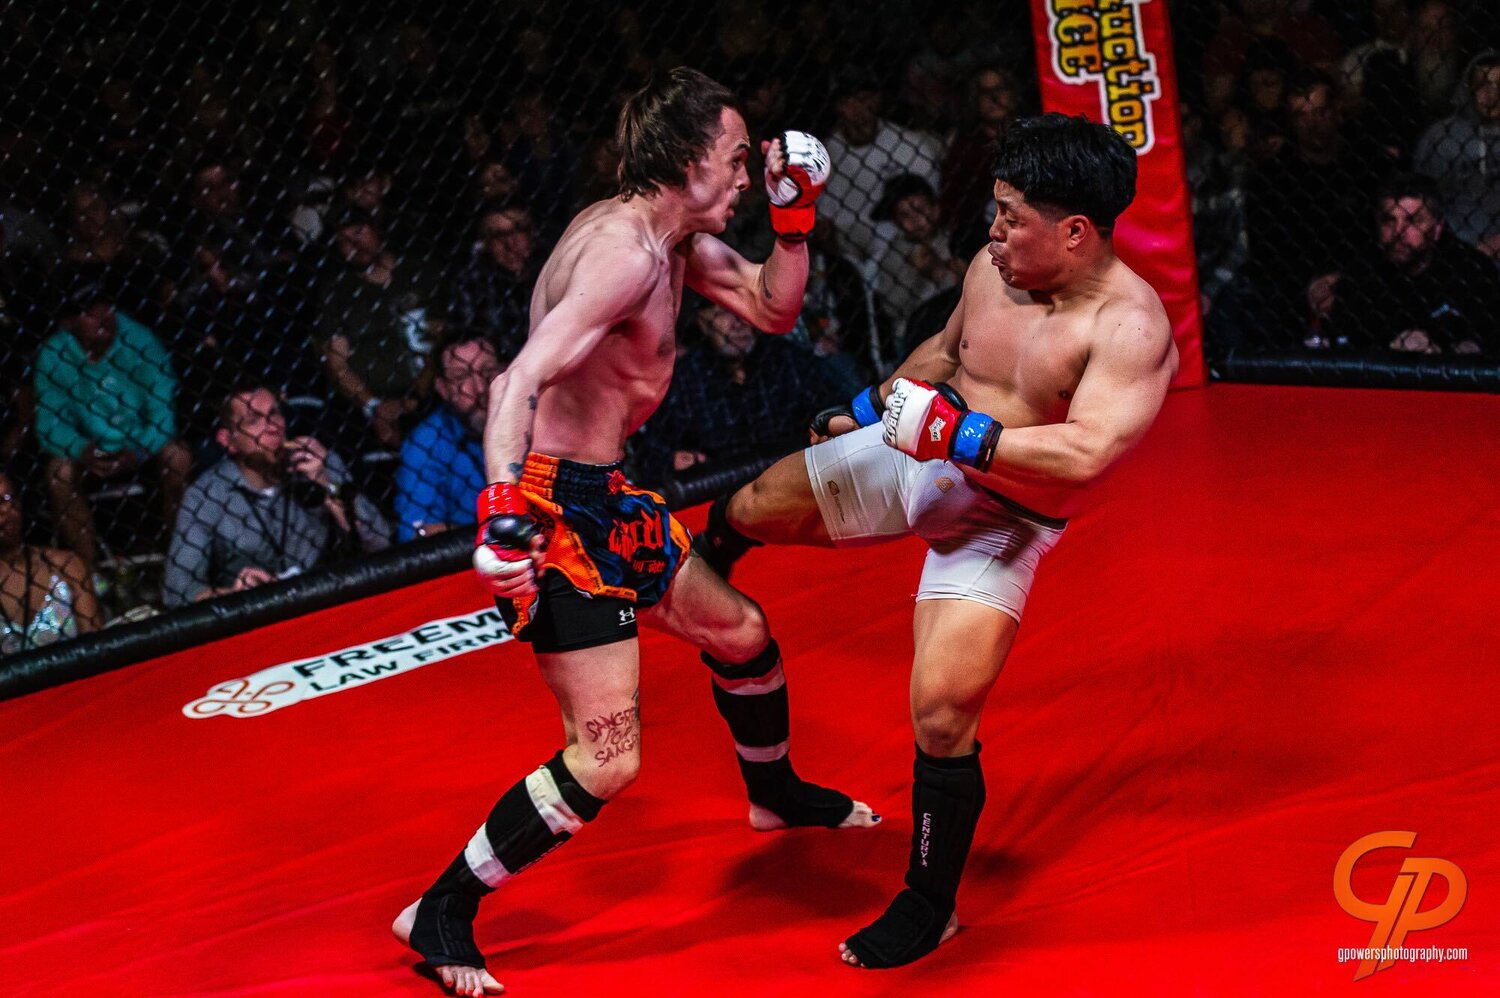 Eddie Matias is pictured at a recent fight in this photo provided by Gavin Powers of G. Powers Photography